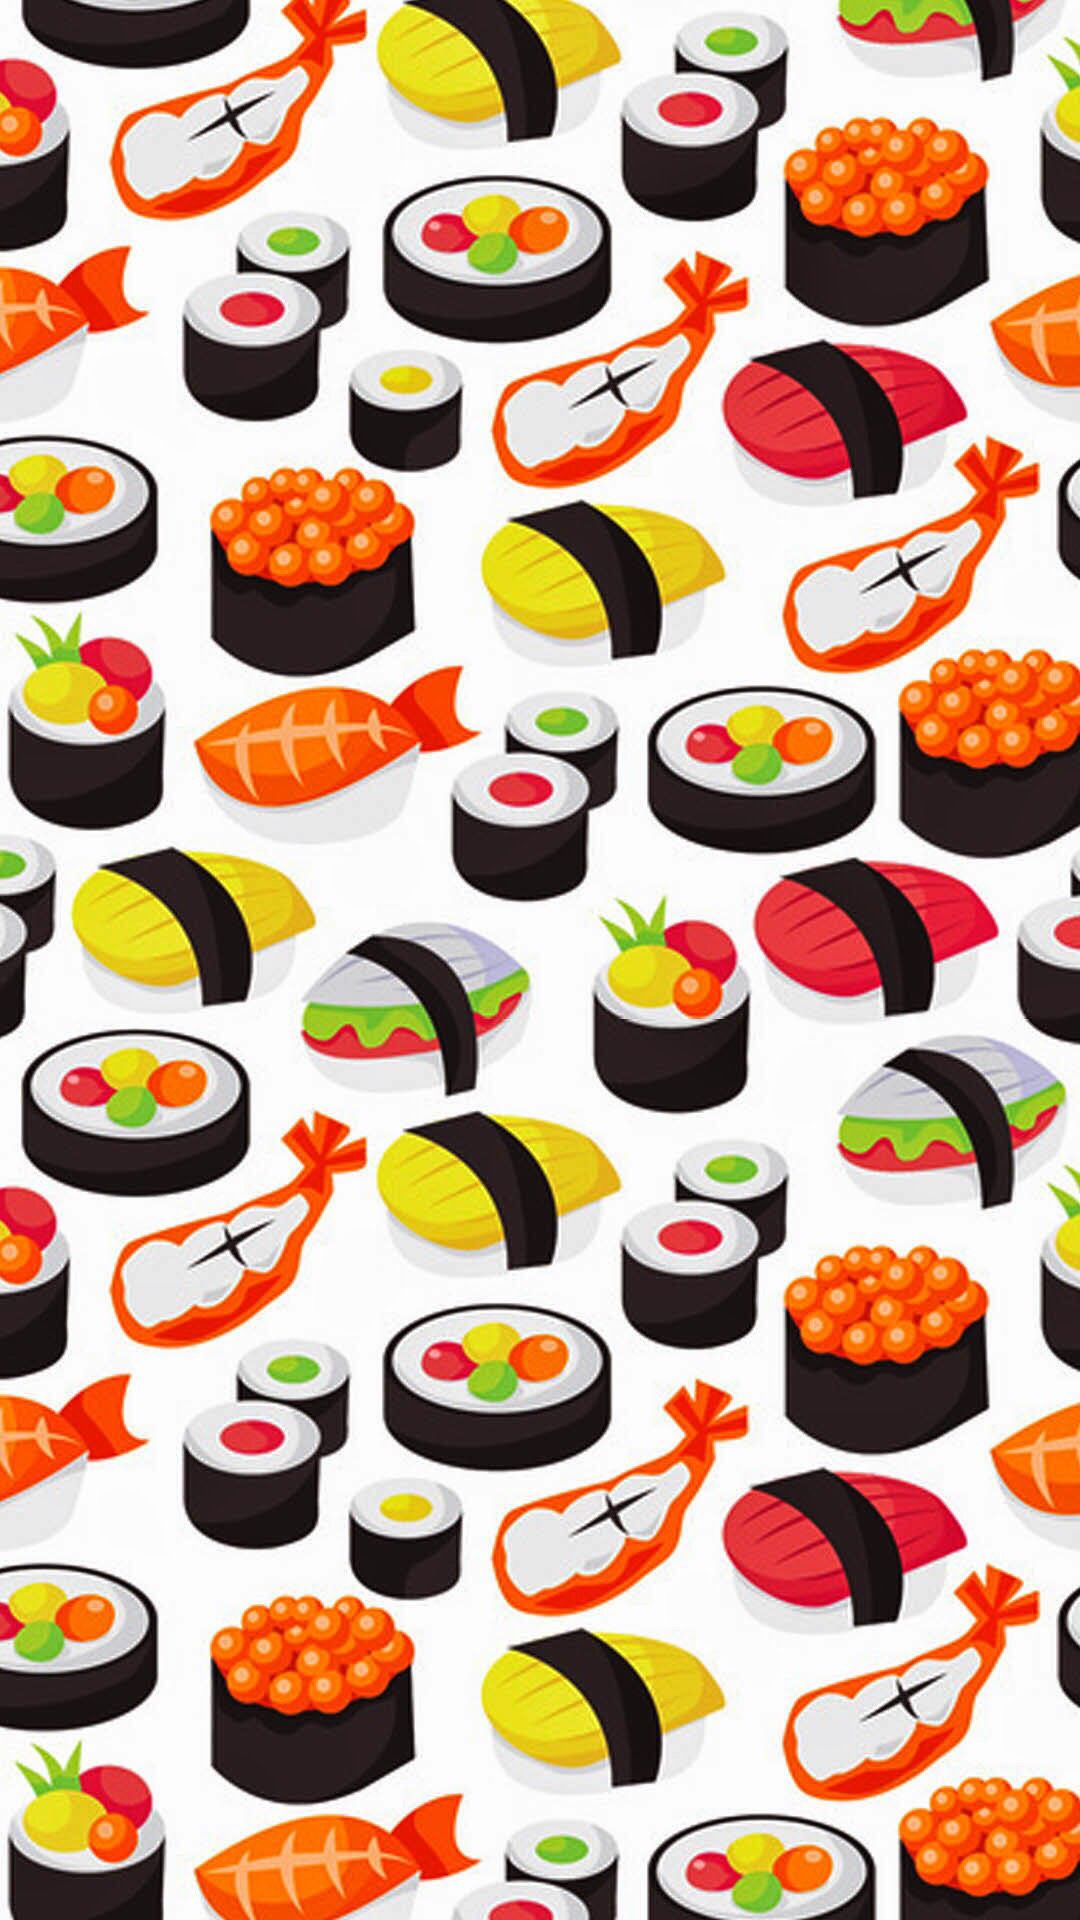 Sushi and seafood print iphone wallpaper food sushi art iphone wallpaper